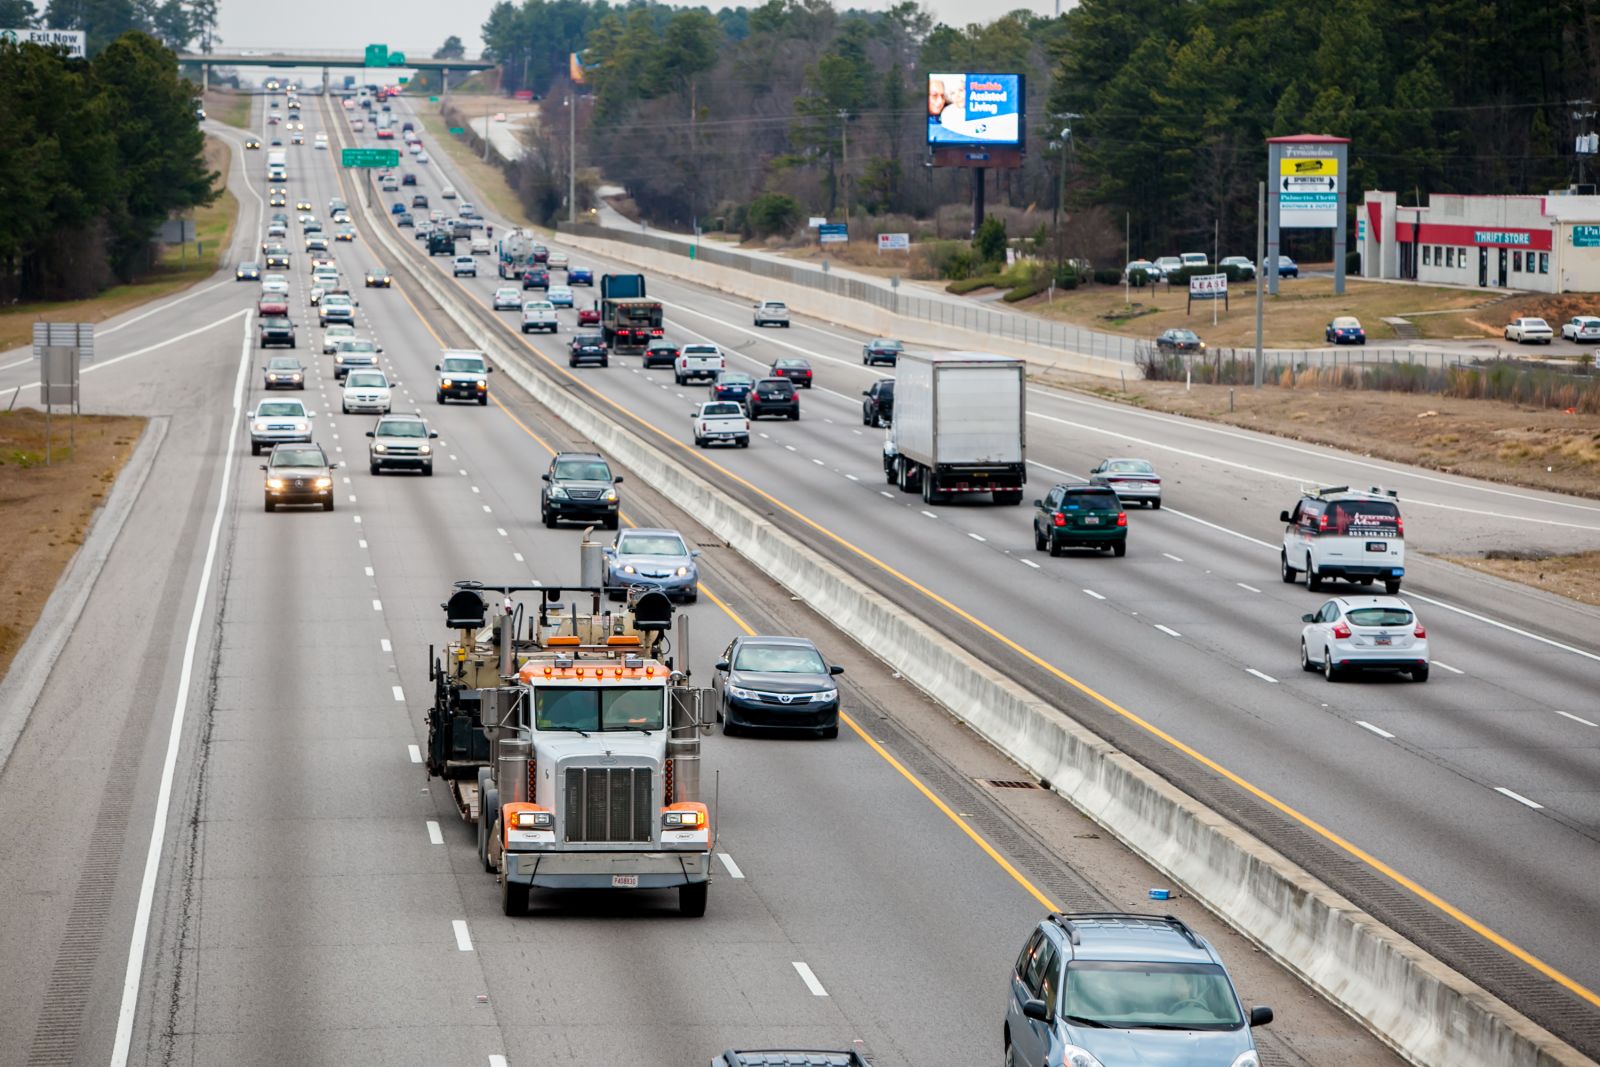 South Carolina plans to use $360 million from American Rescue Act funding to accelerate expansion plans on Interstate 26 to alleviate highway traffic between Charleston and Columbia. (Photo/File)